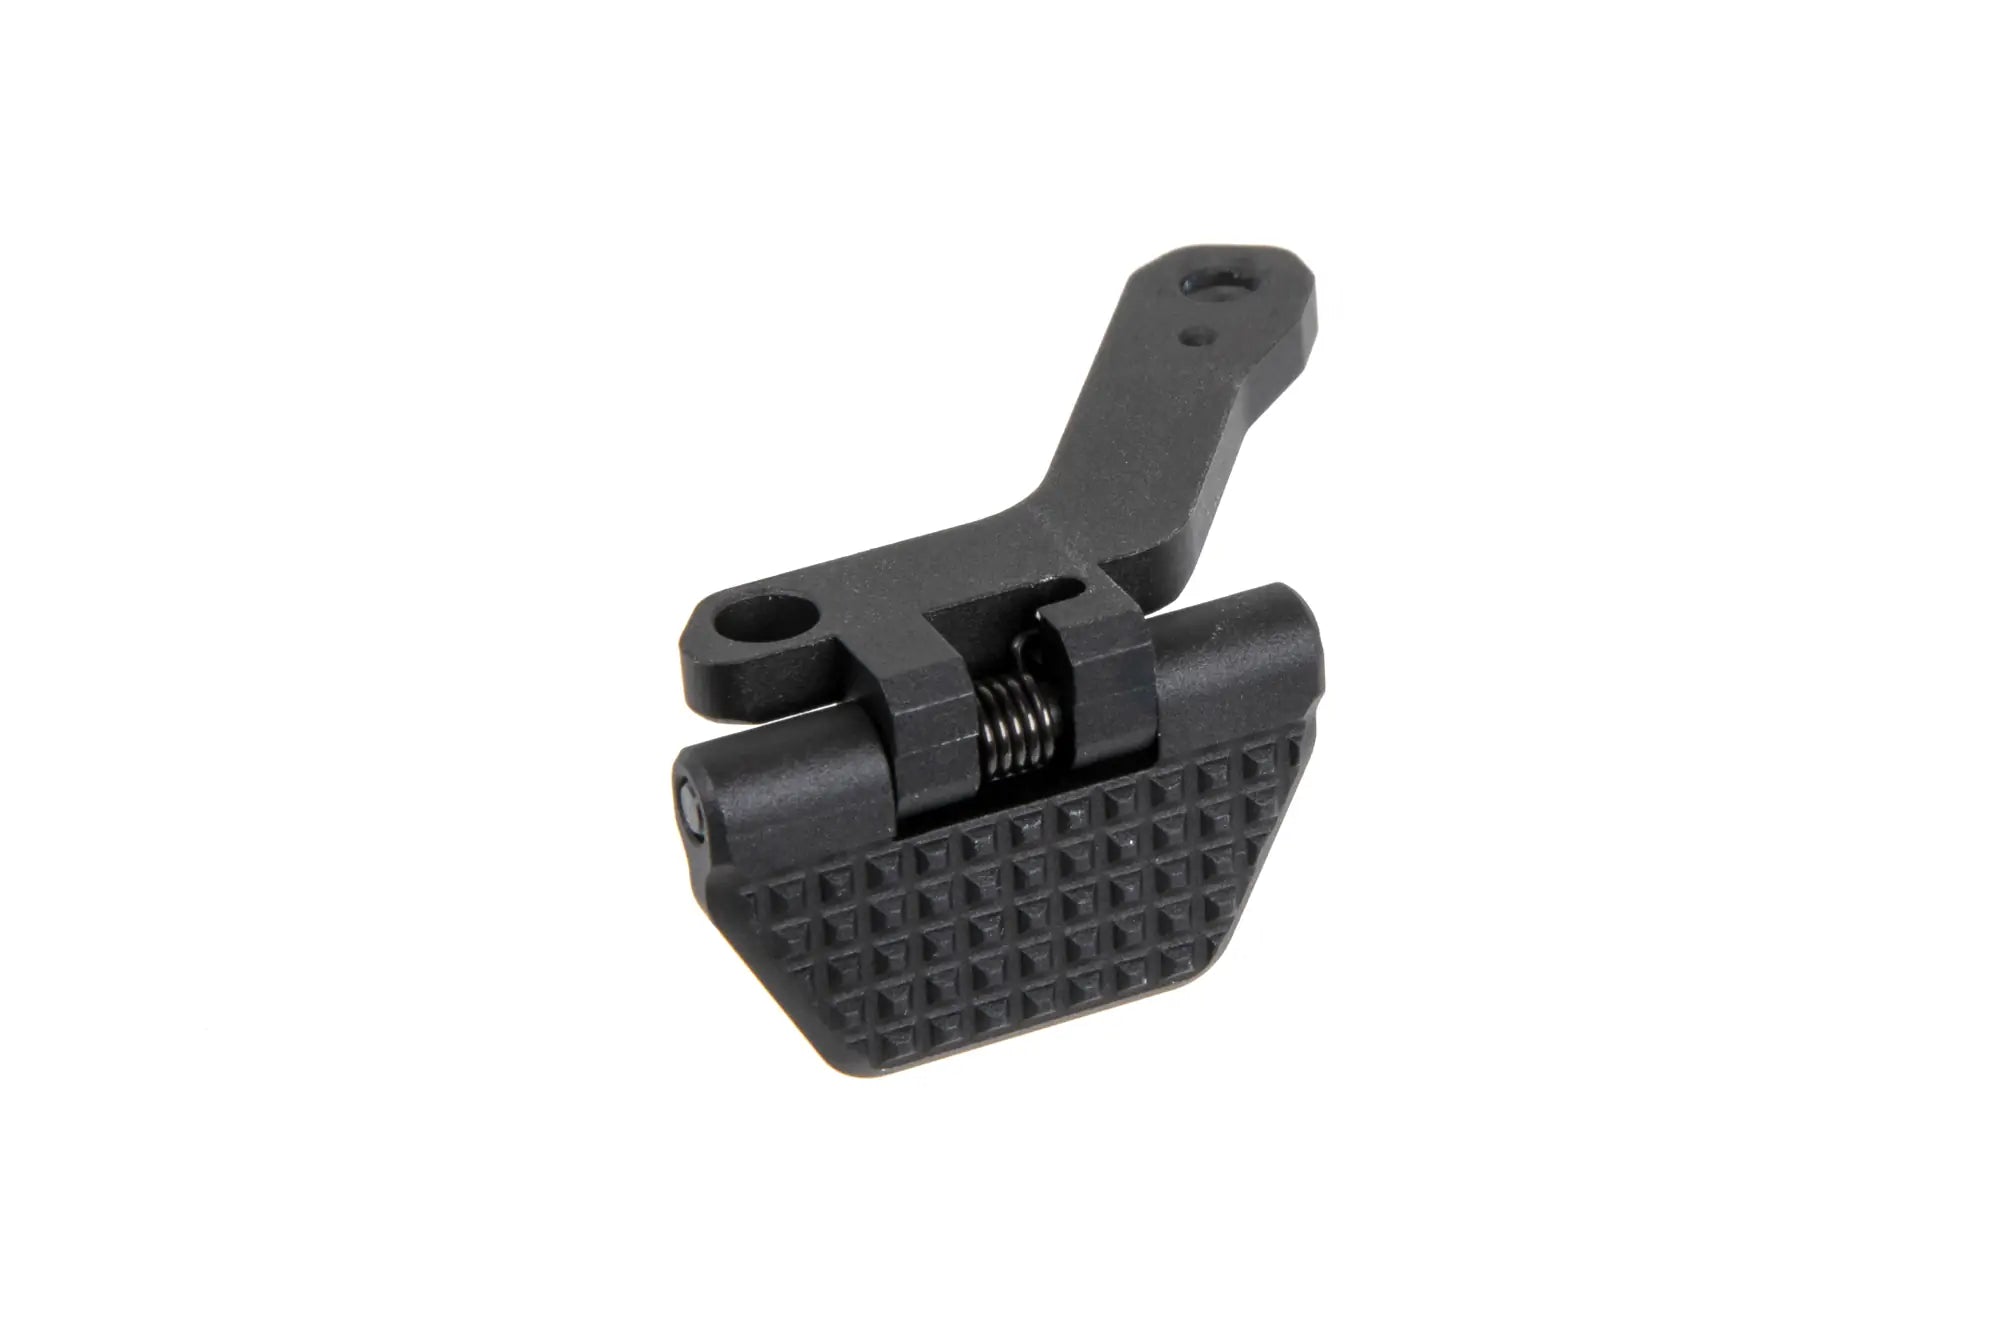 TTI Airsoft thumb rest for AAP01, enhances ergonomics and grip stability.